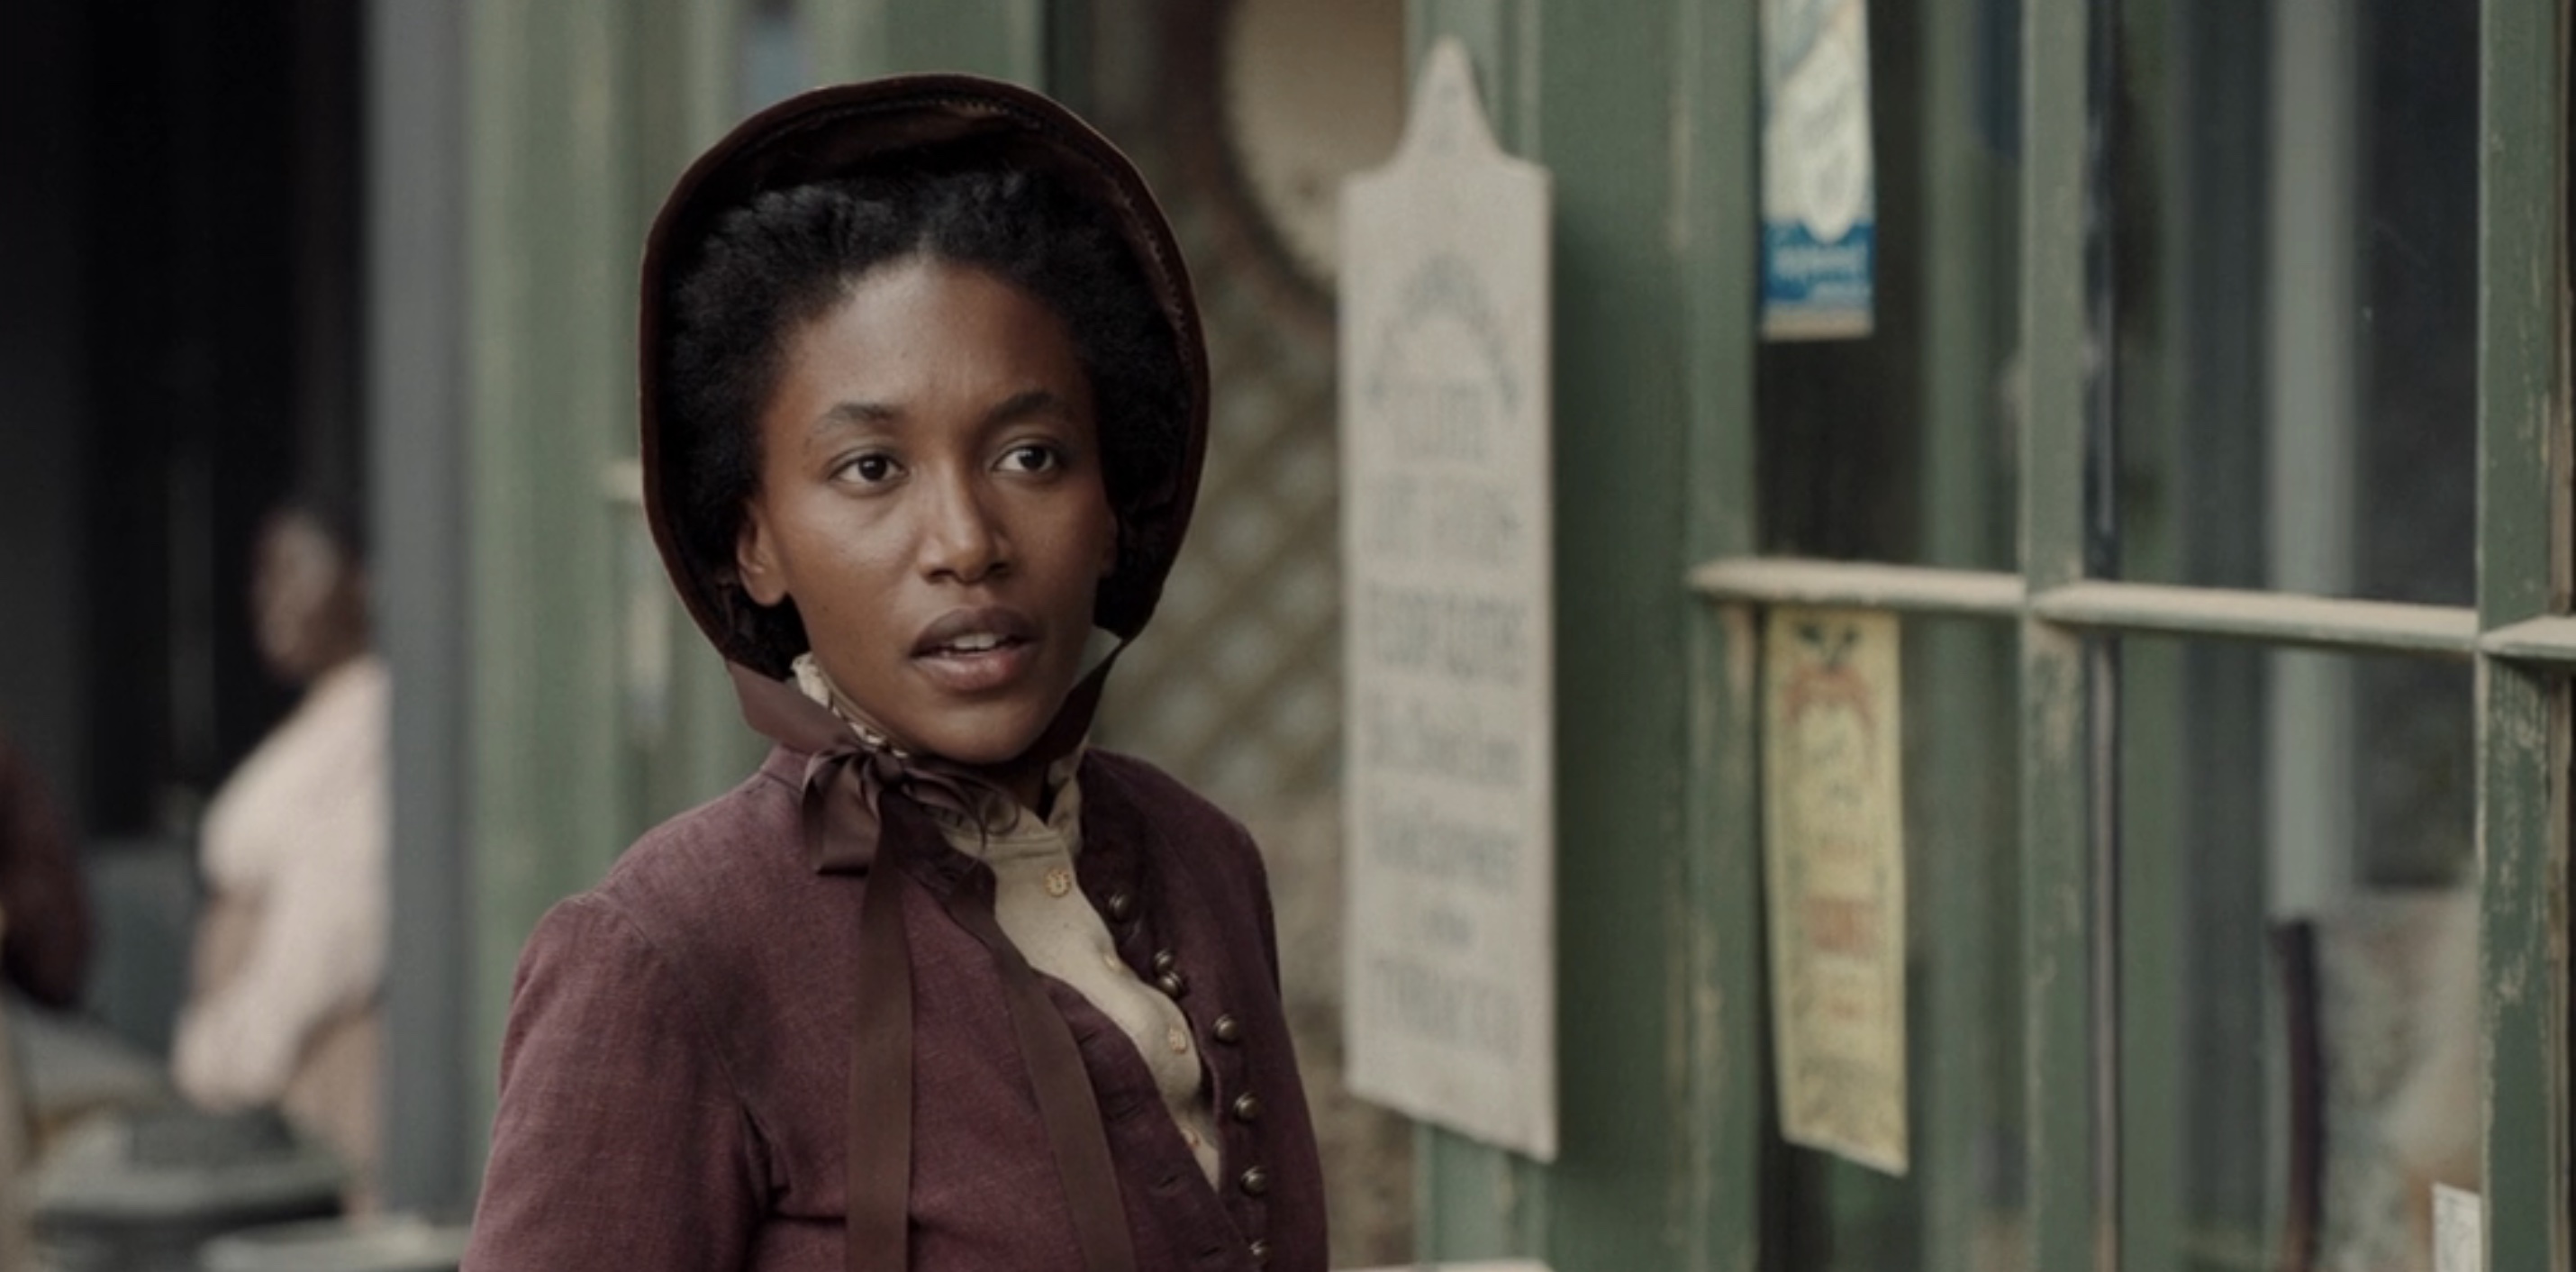 Lawmen: Bass Reeves Cast on Paramount+ - Lauren E. Banks as Jennie Reeves